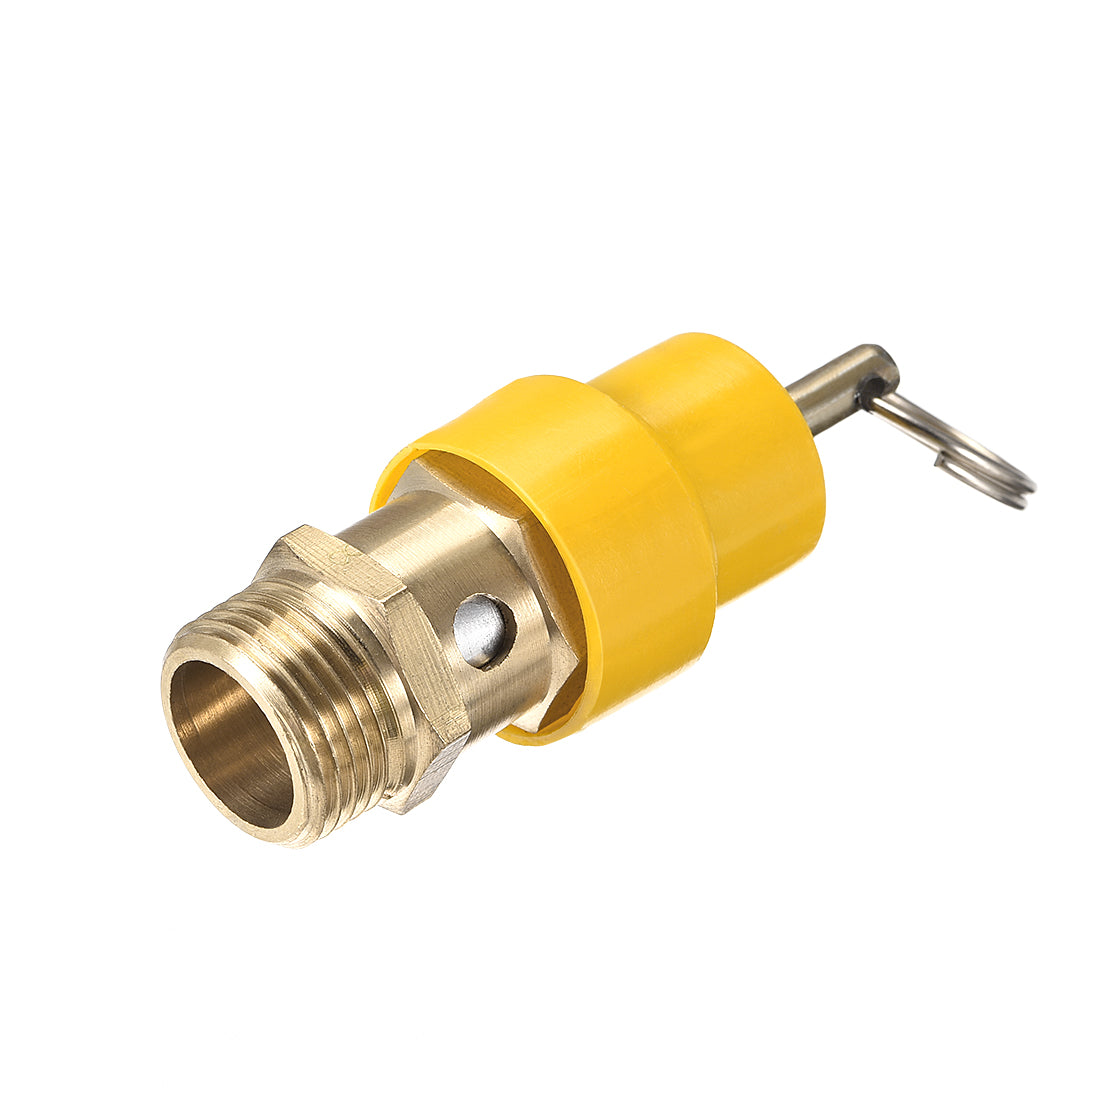 uxcell Uxcell Air Compressor Pressure Relief Valve Release G 3/8 Male Threaded 115 PSI Set Pressure Yellow Hat